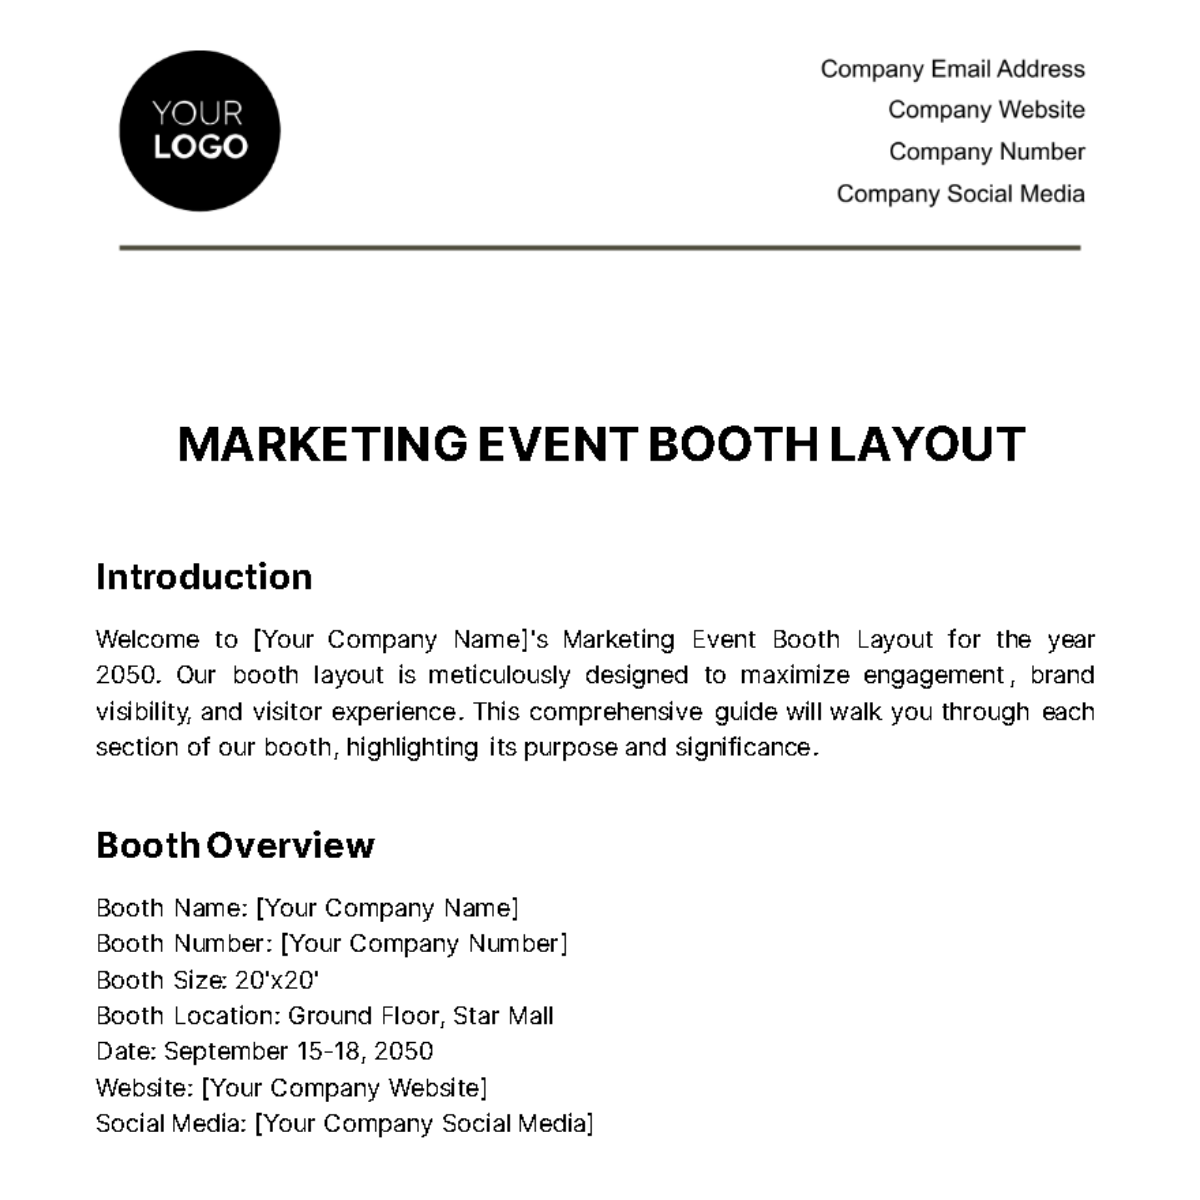 Marketing Event Booth Layout Template